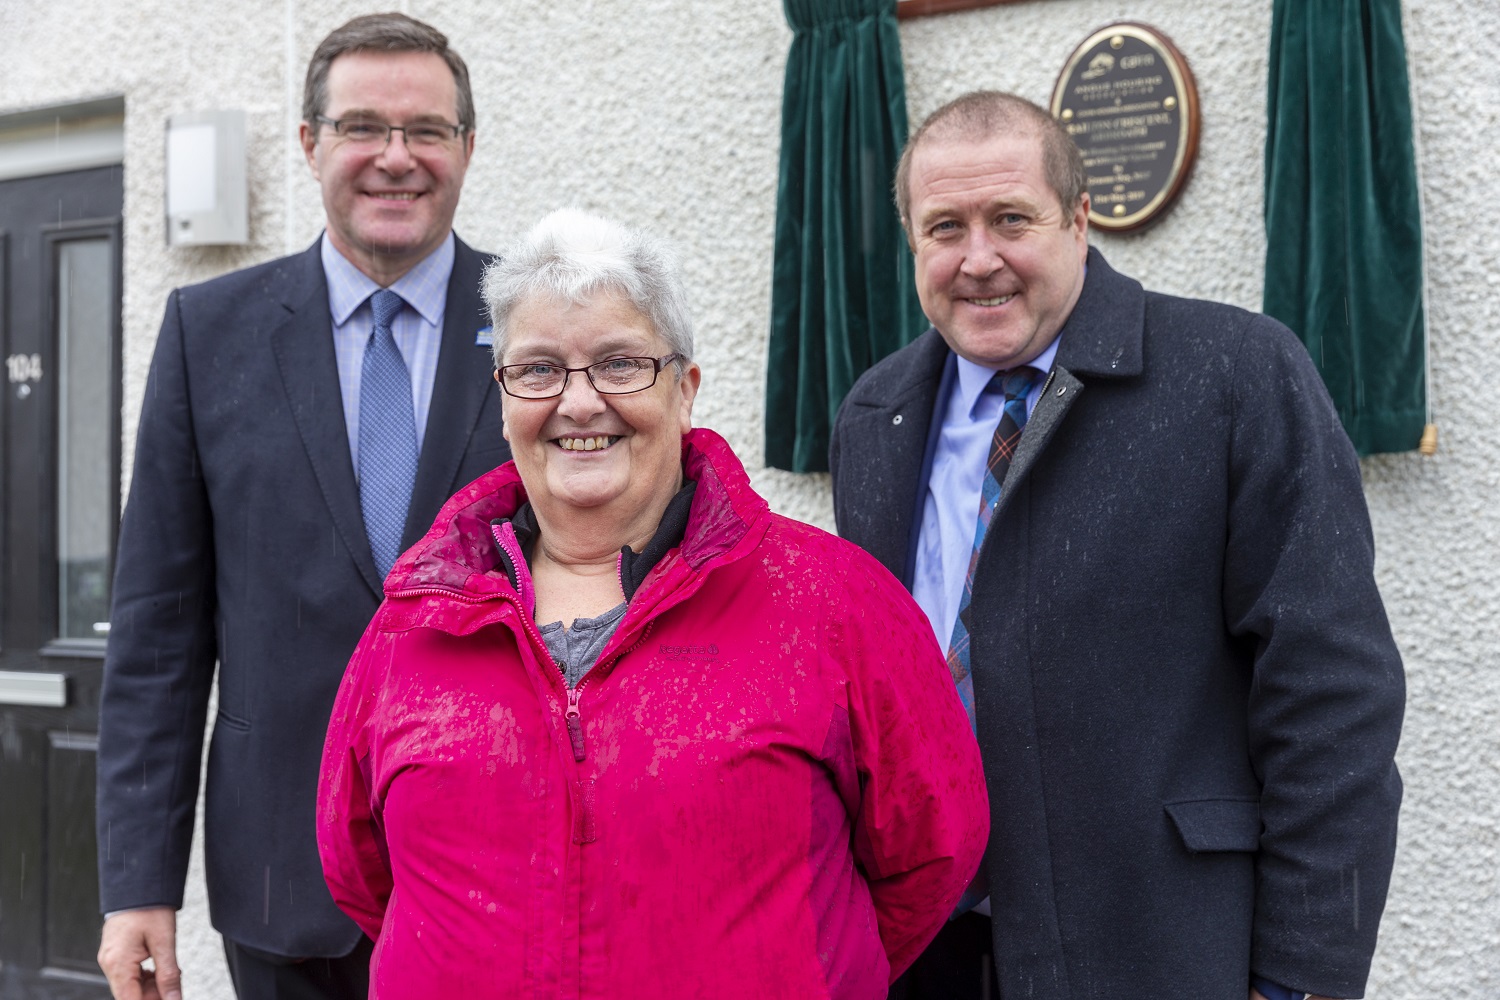 MSP officially opens Arbroath affordable homes